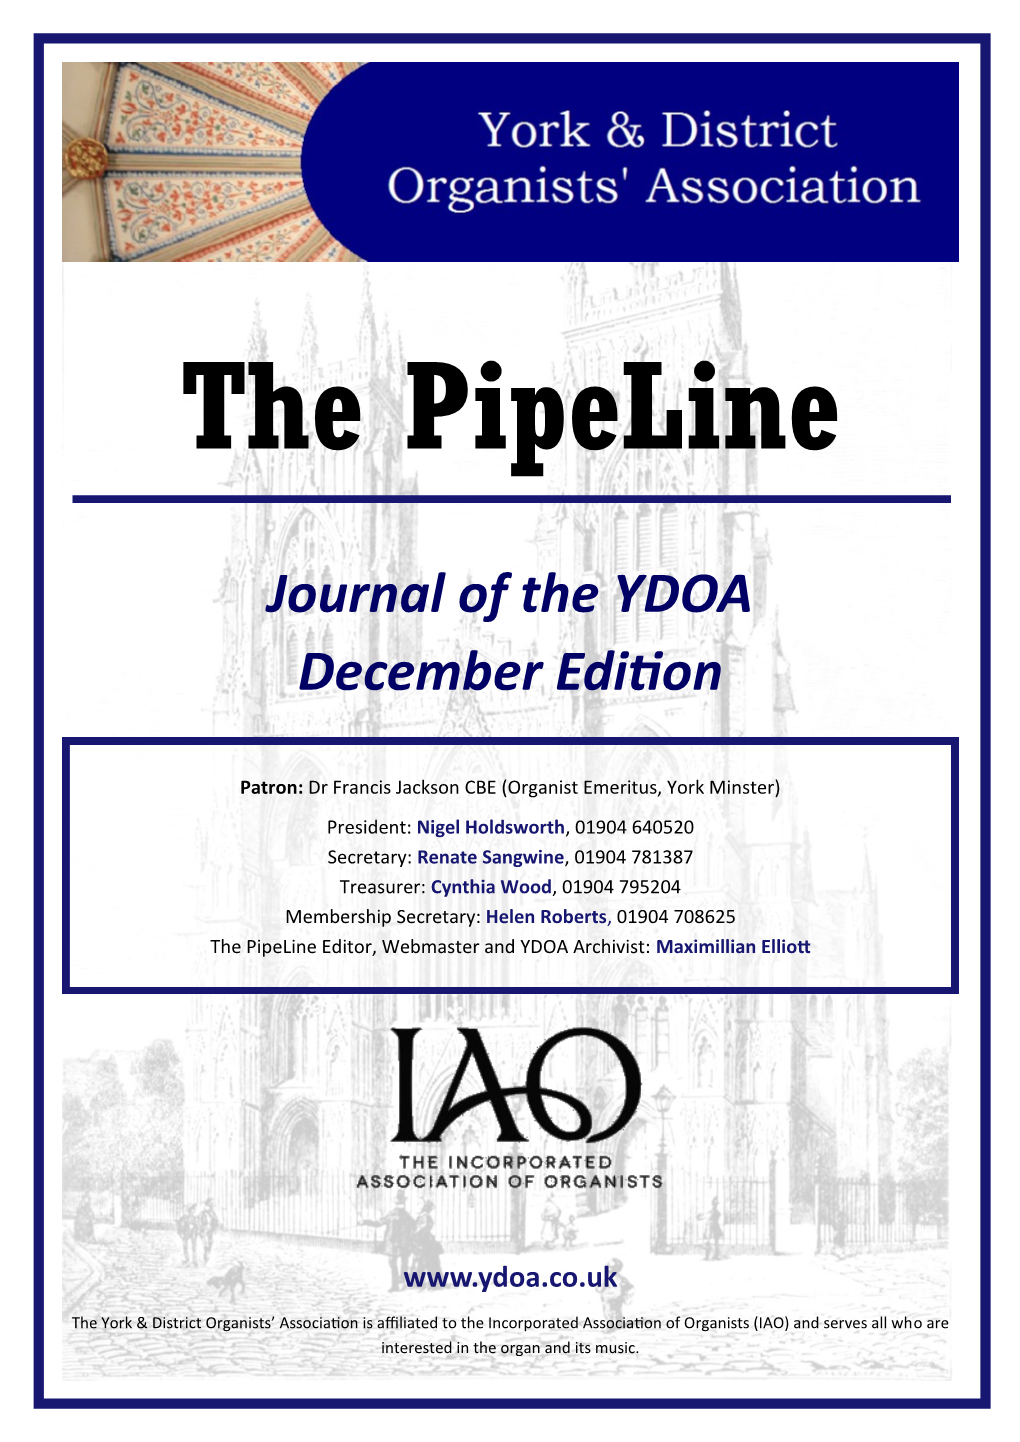 Journal of the YDOA December Edition